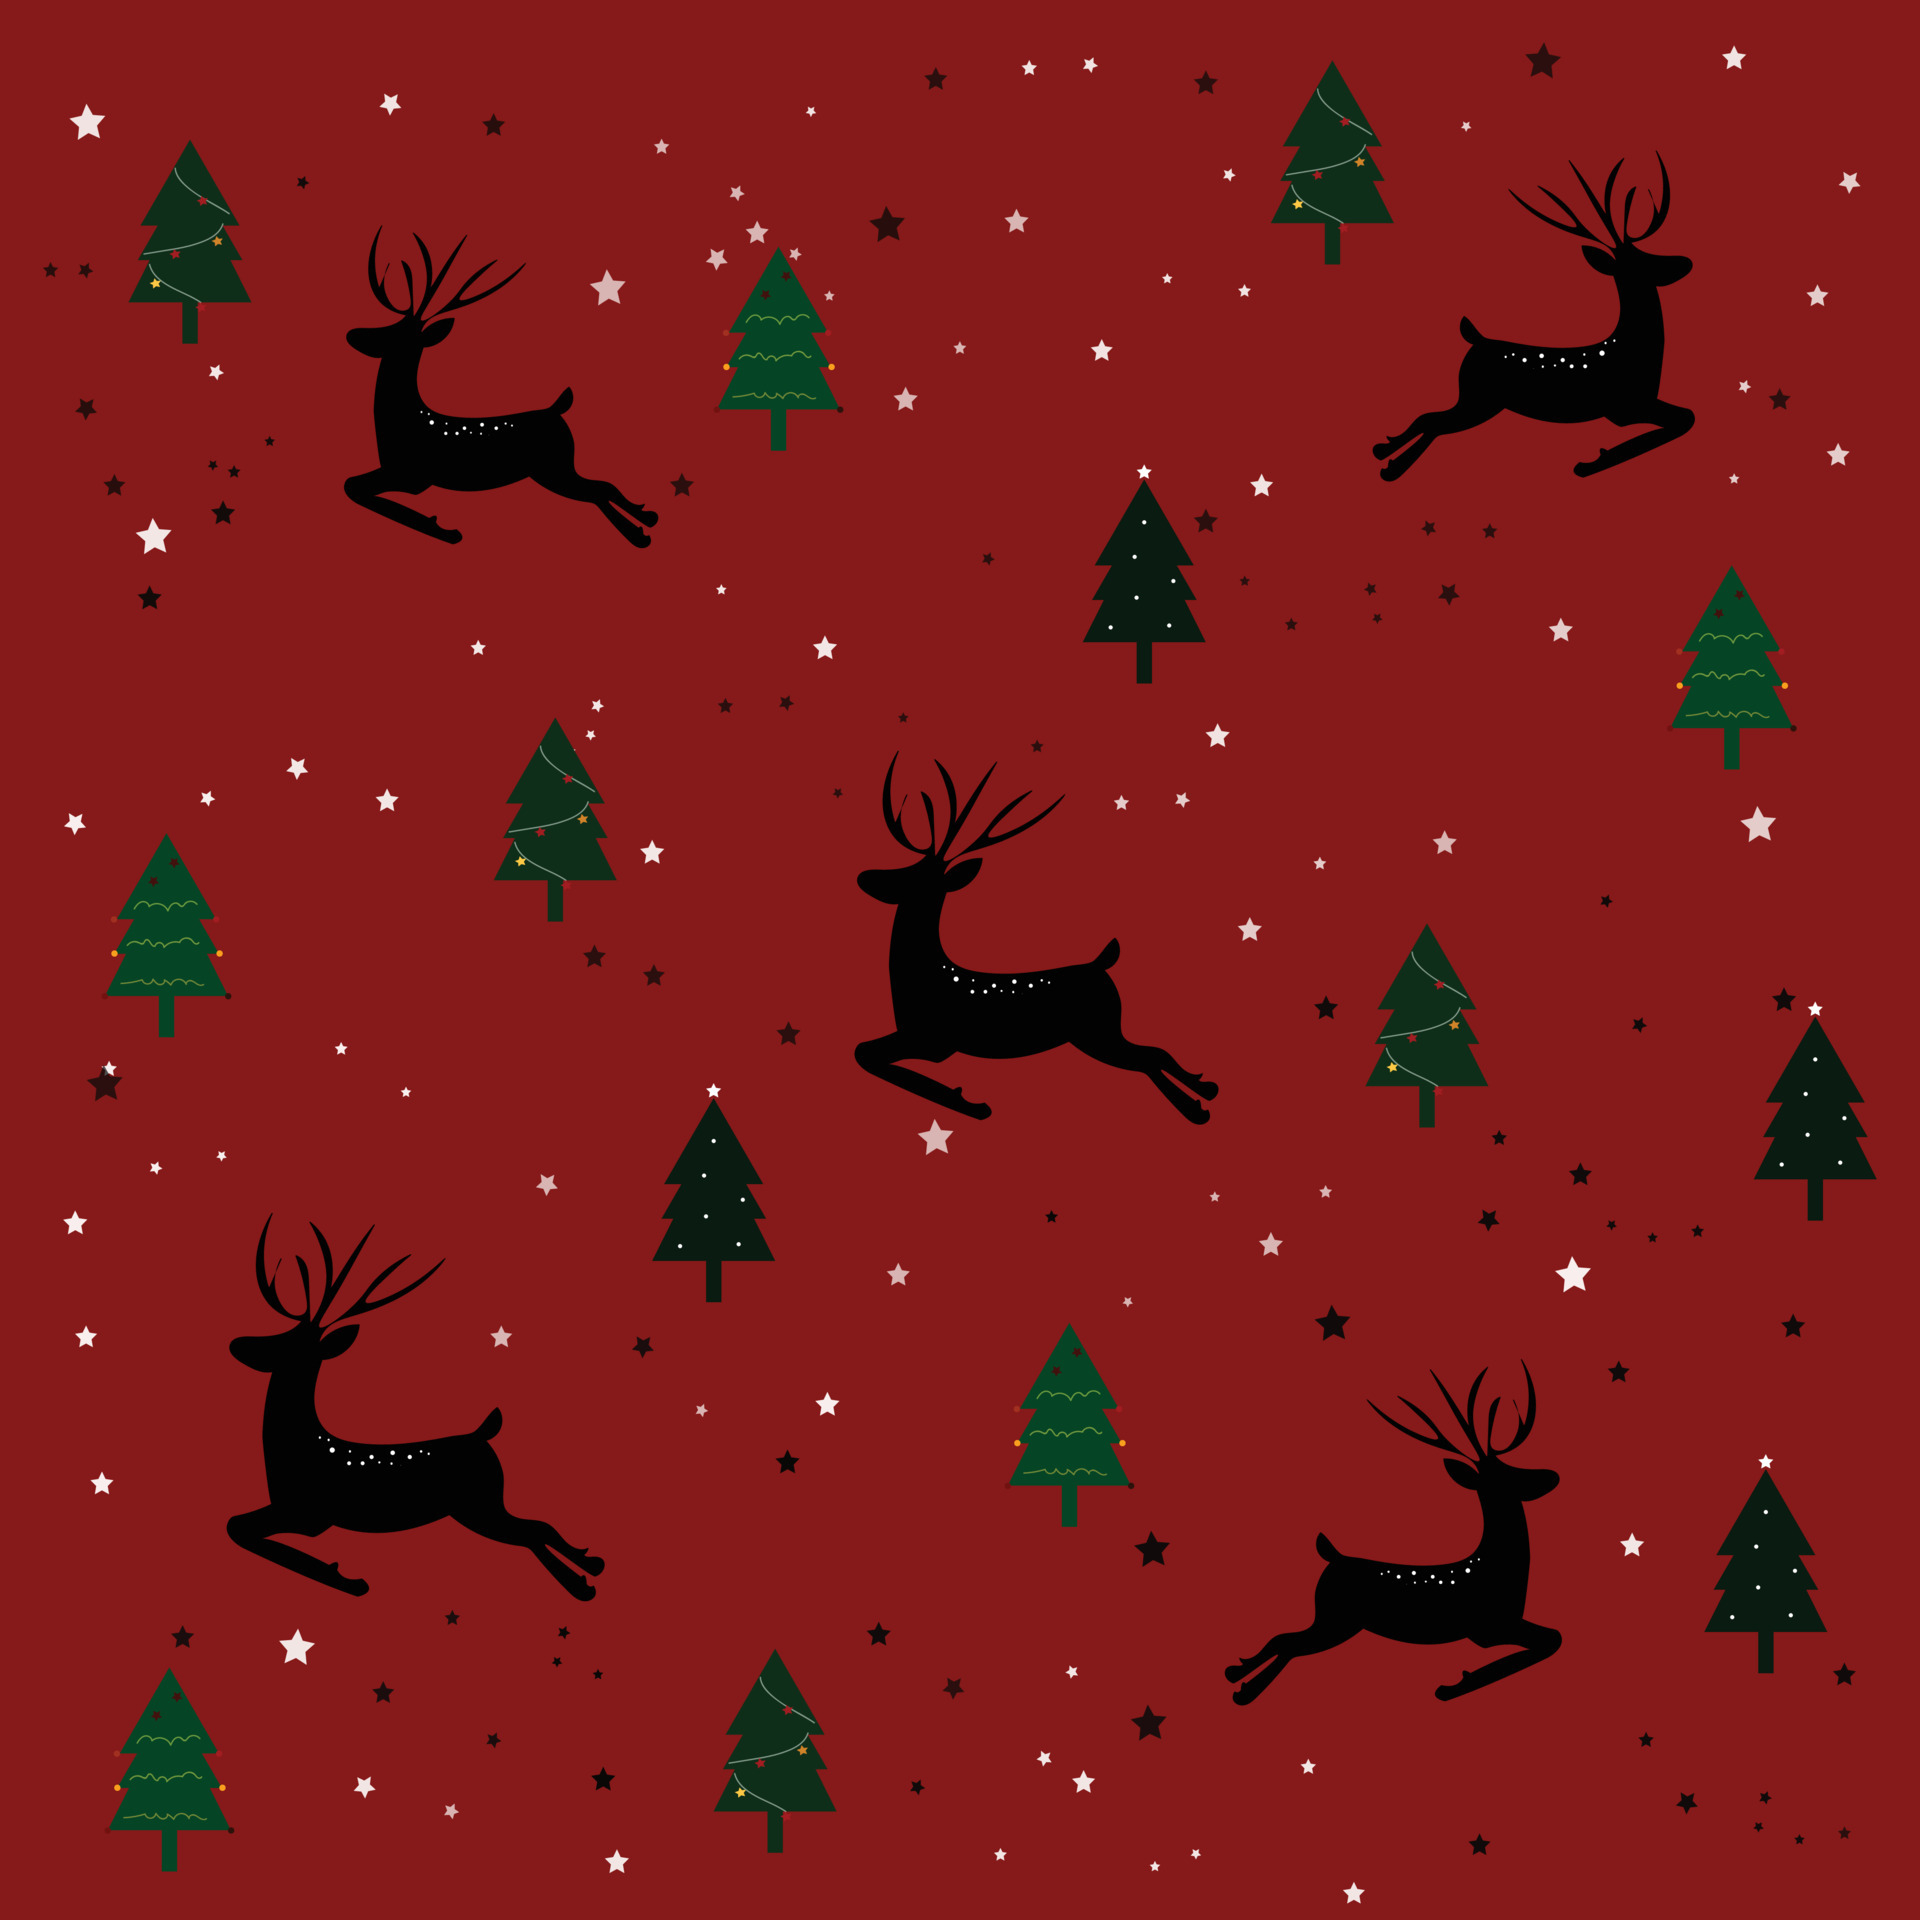 1920x1920 Christmas pattern reindeer and snowflakes and Christmas tree winter holiday wallpaper for design black and white illustration 4988622 Vector Art at Vecteezy